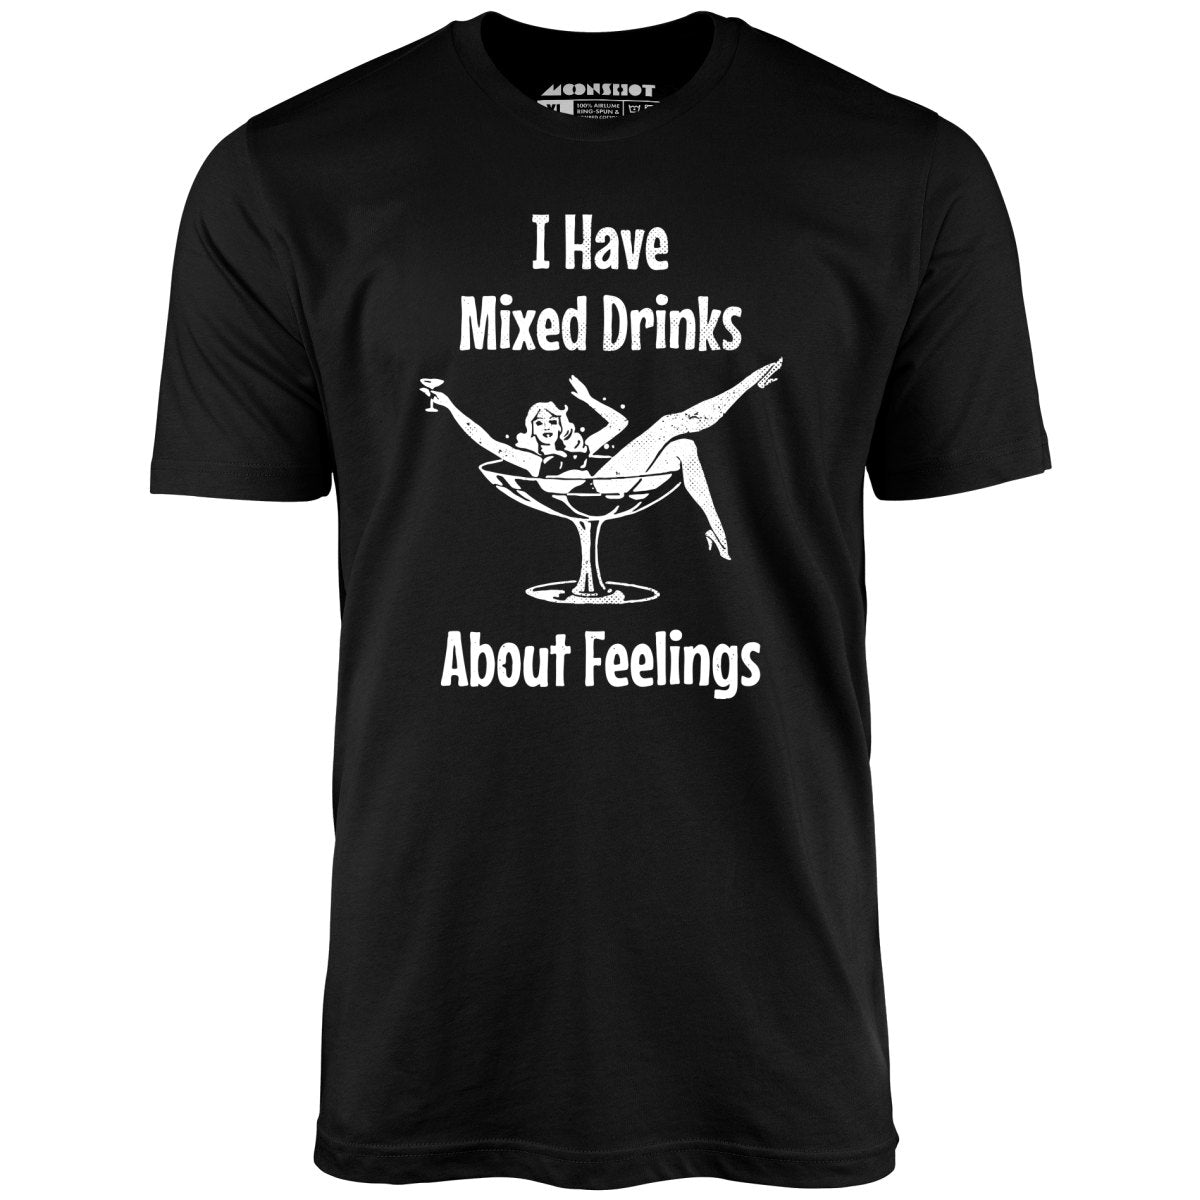 I Have Mixed Drinks About Feelings - Unisex T-Shirt